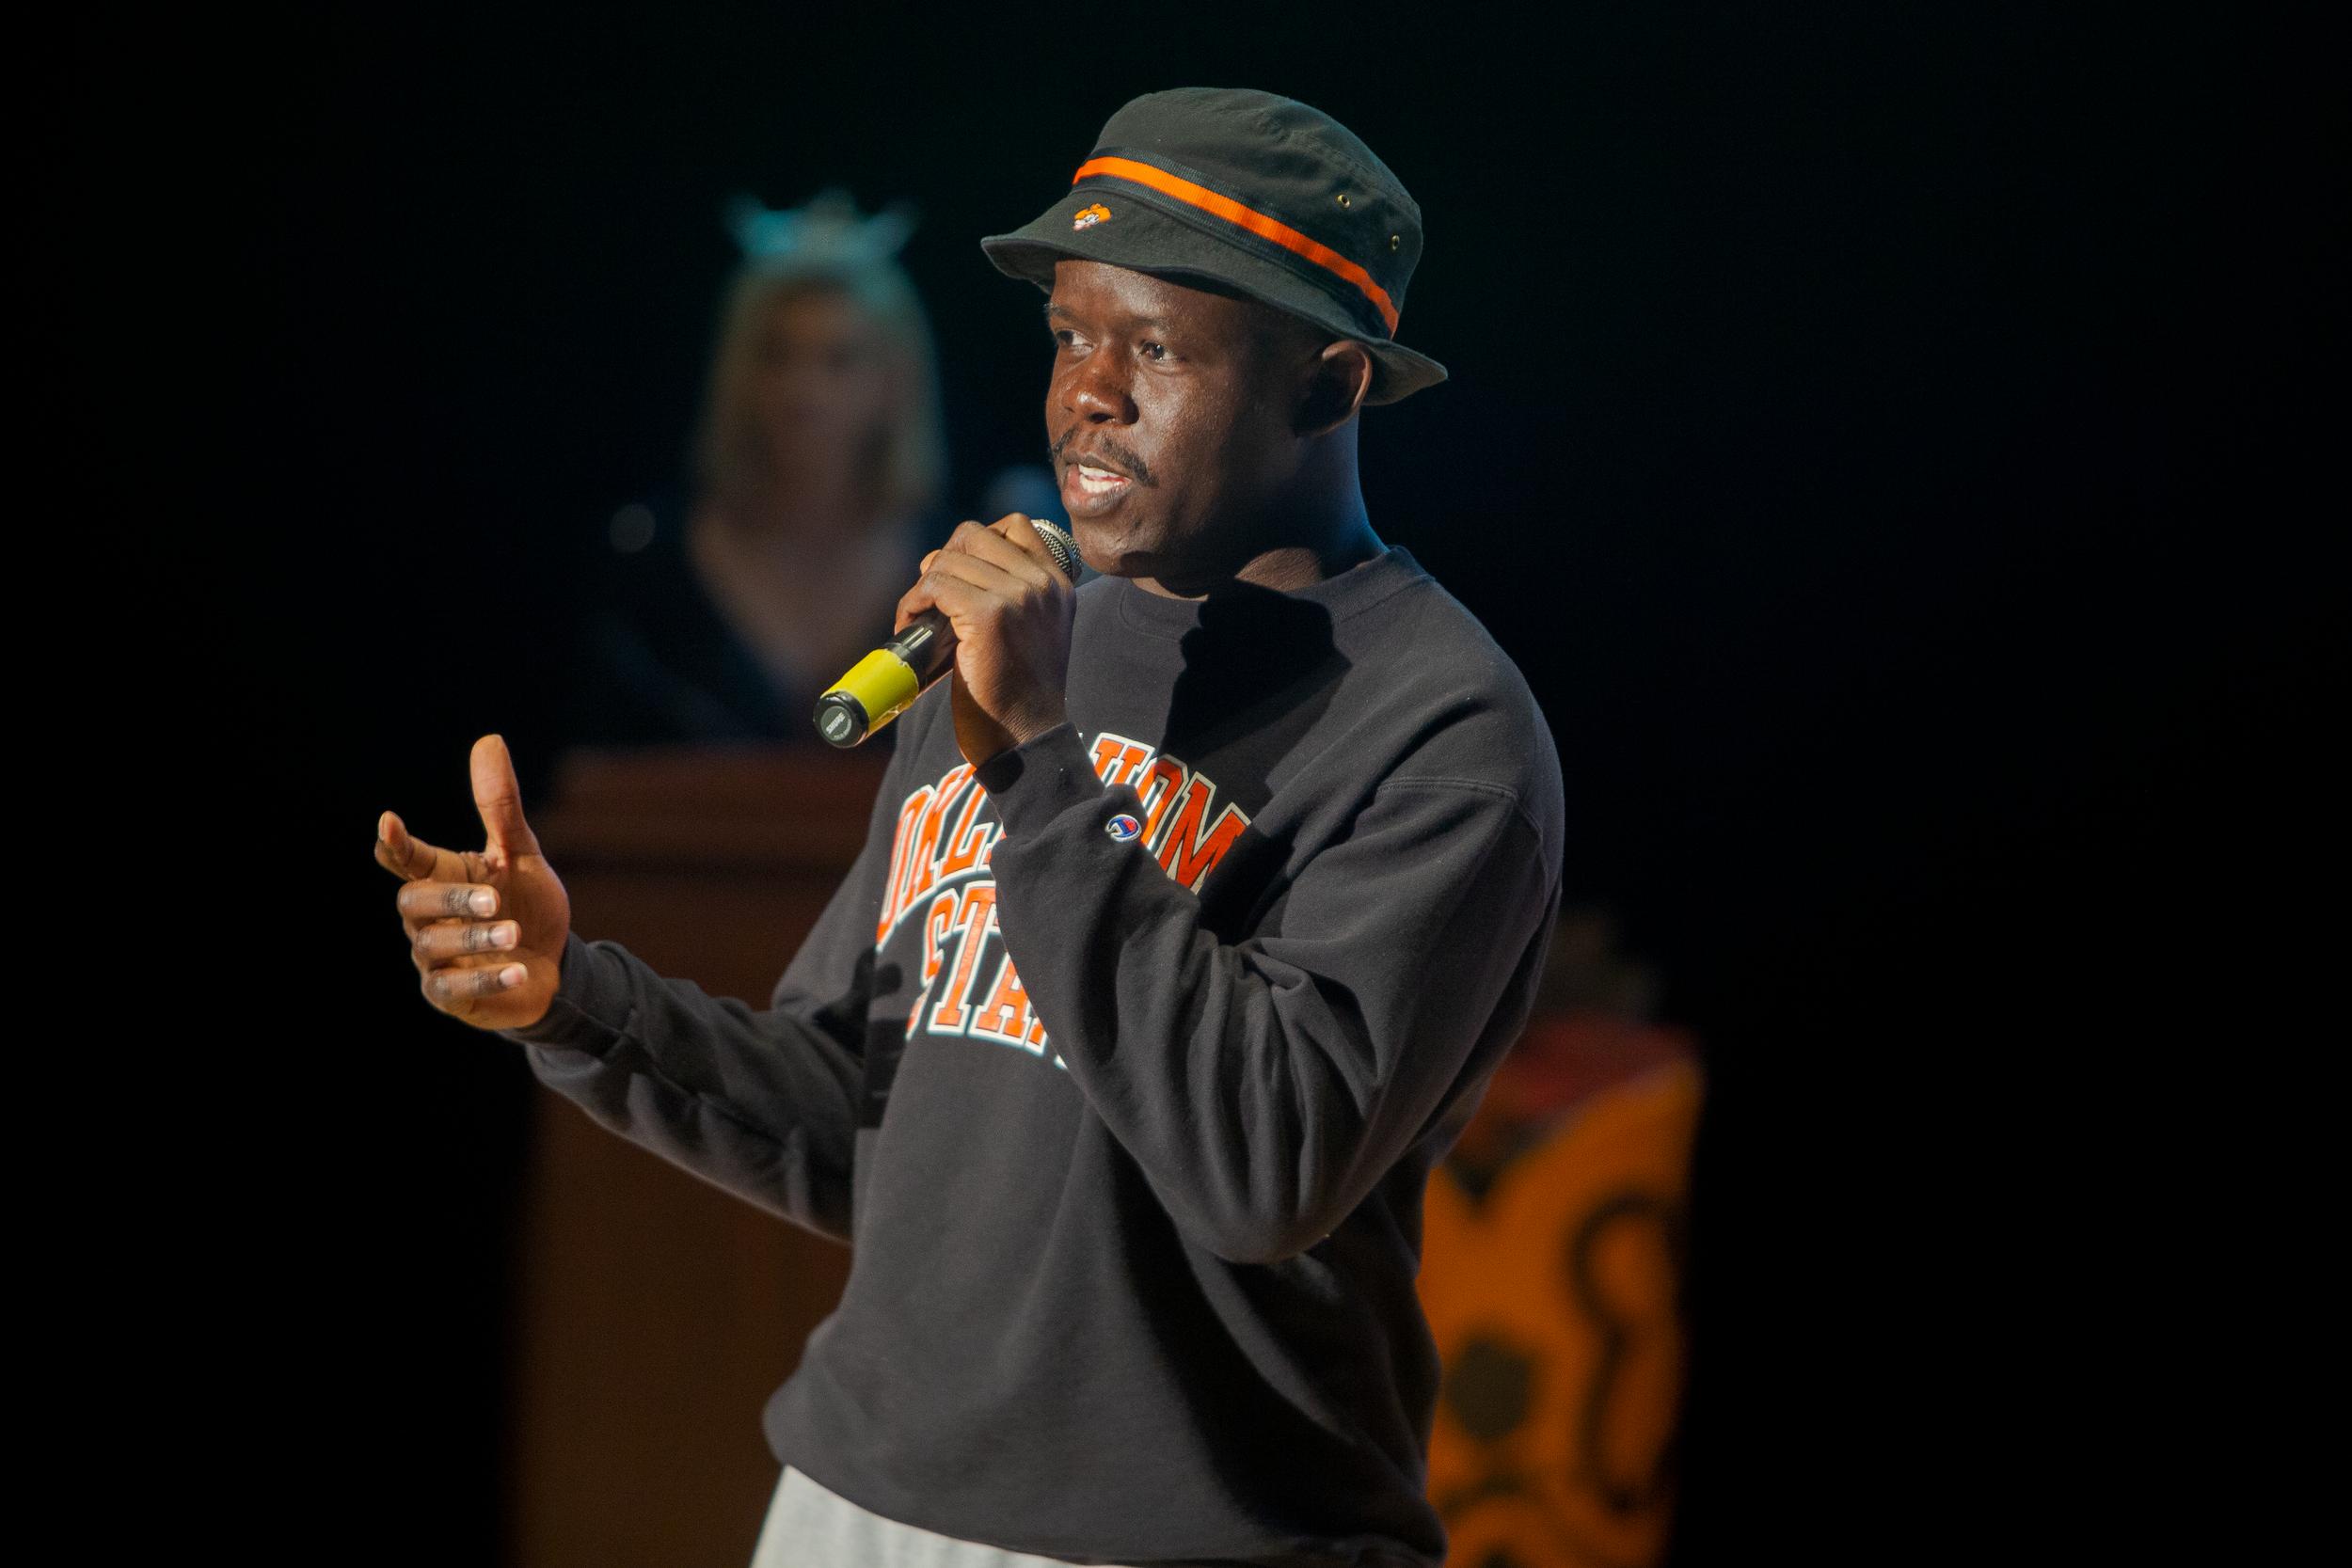 A young black man speaks into a microphone at the Mr. OSU contest